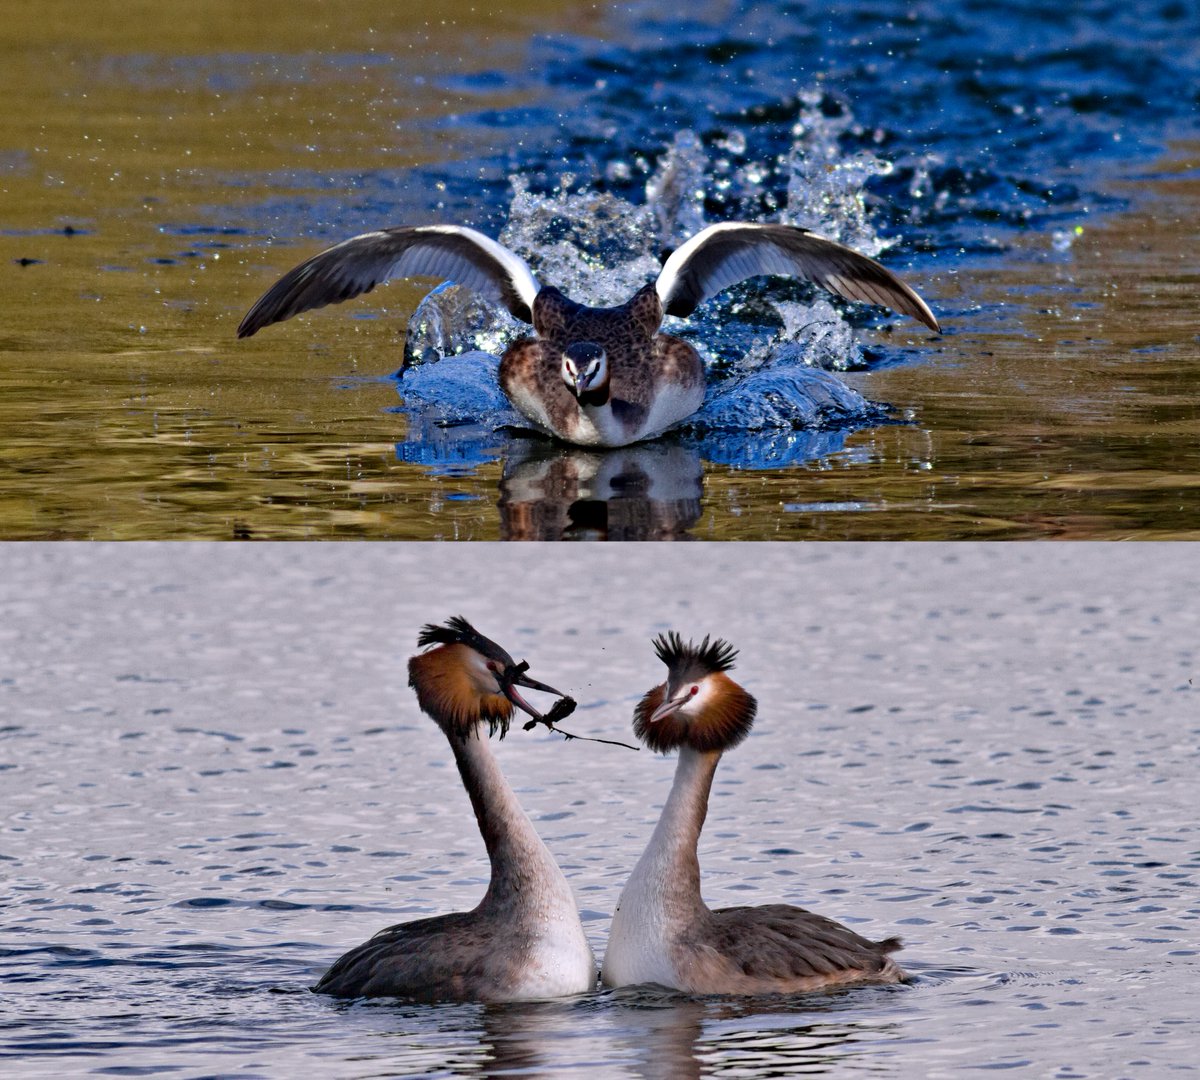 Good afternoon. At Edgbaston Reservoir this morning, I could only find three G C Grebes, but a lot of interaction between them. Great to see their courtship dance on a nice  sunny day. @WestMidsBirding .